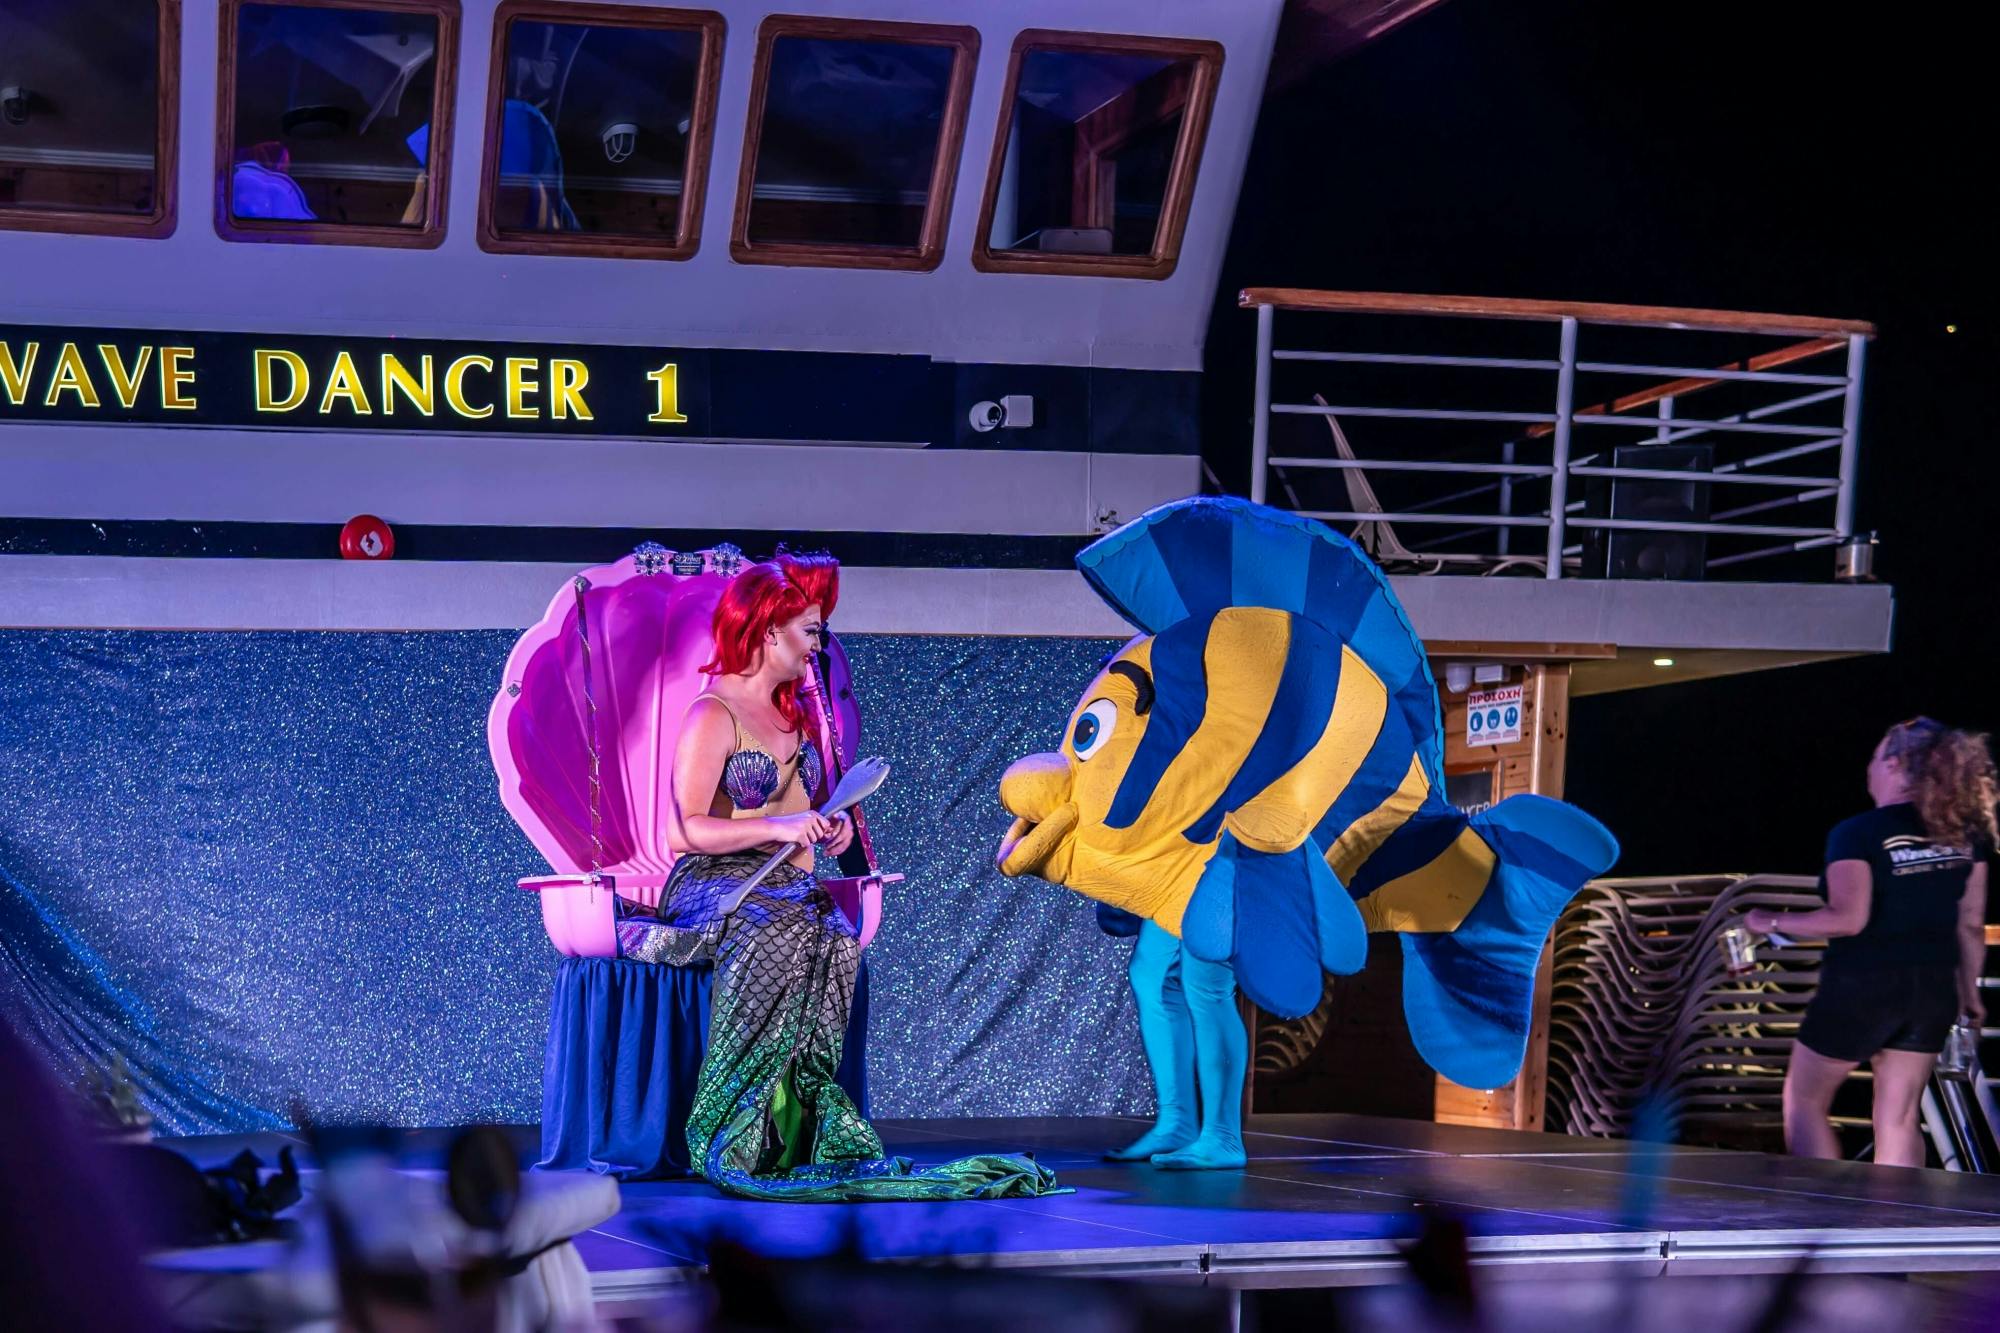 Wave Dancer Sunset Cruise with Stardust Variety Show